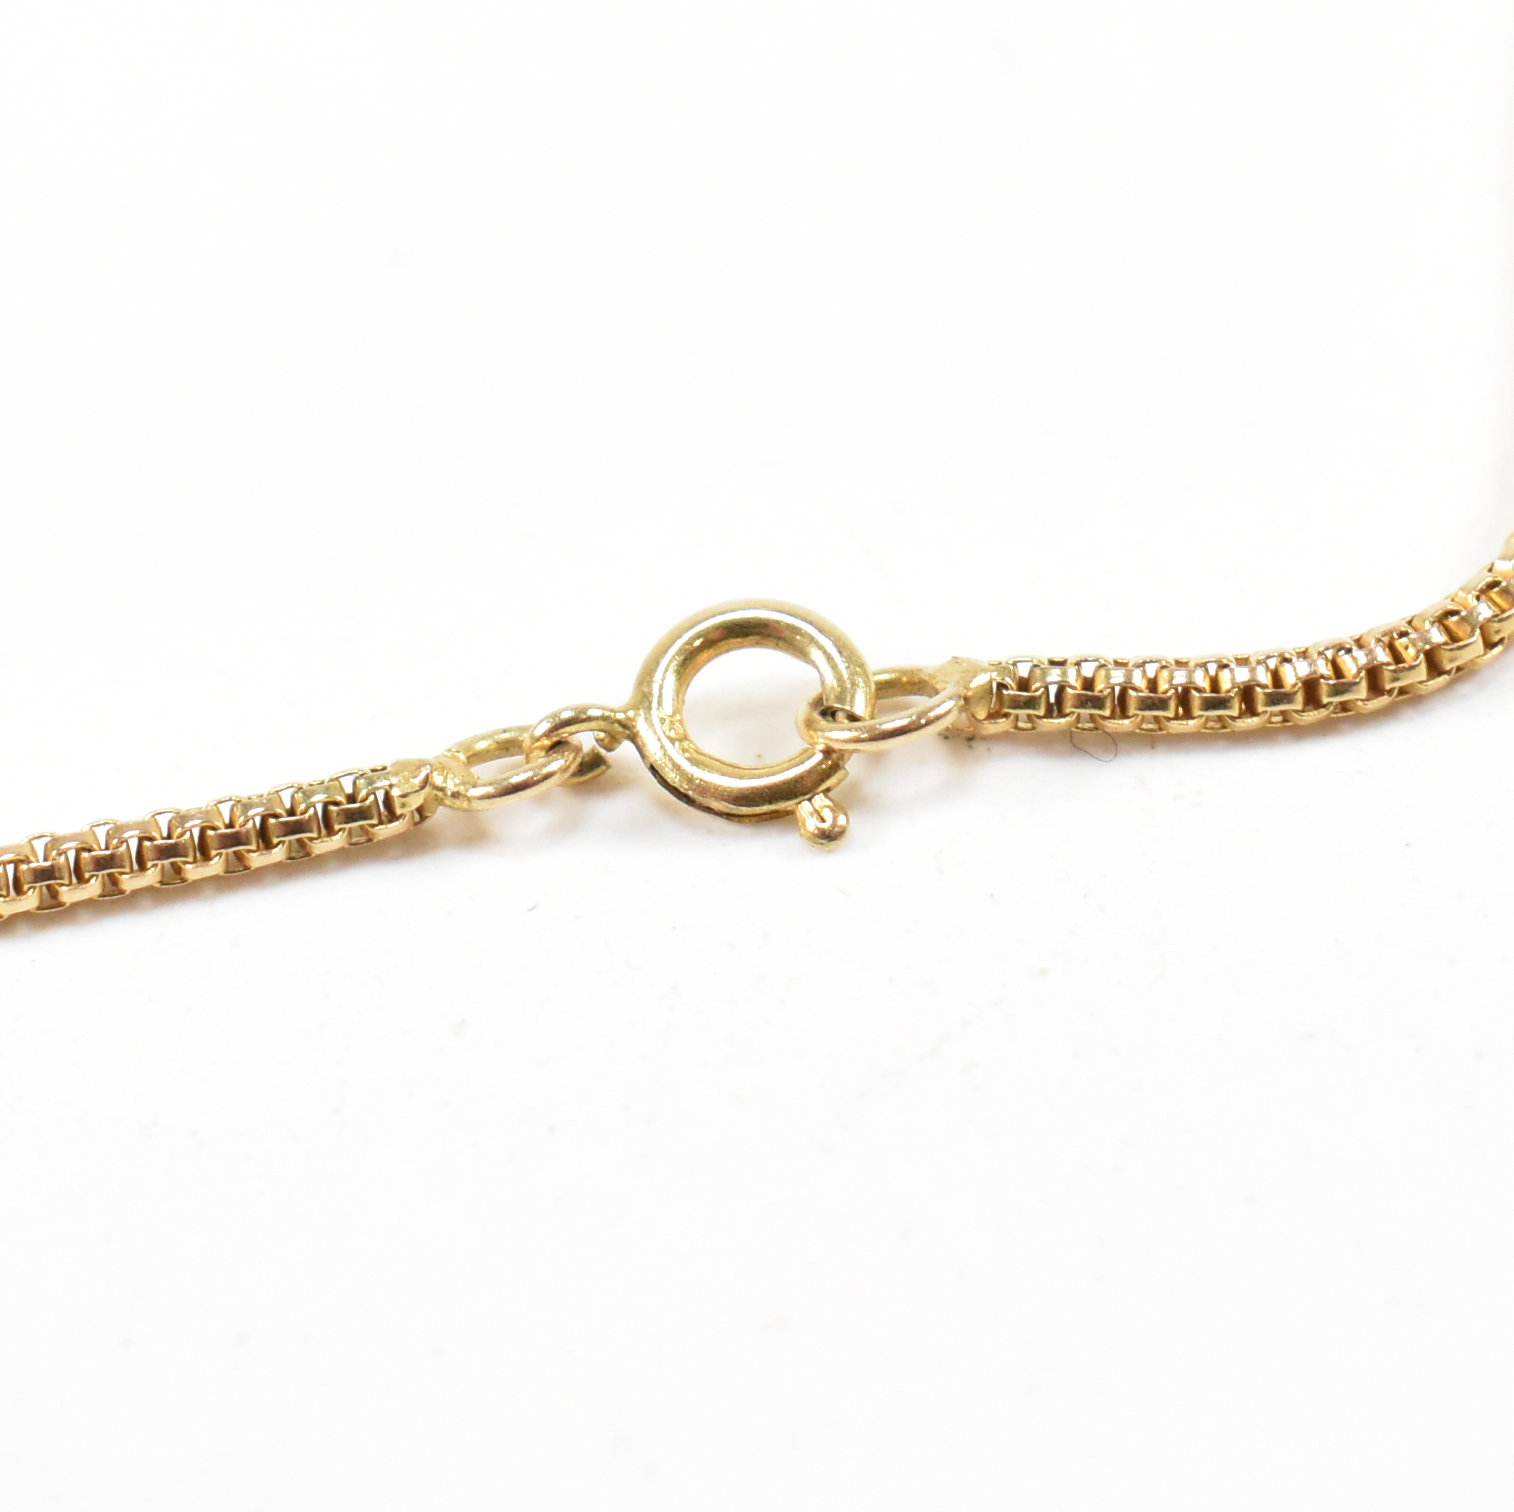 VINTAGE 9CT GOLD NECKLACE CHAIN - Image 5 of 6